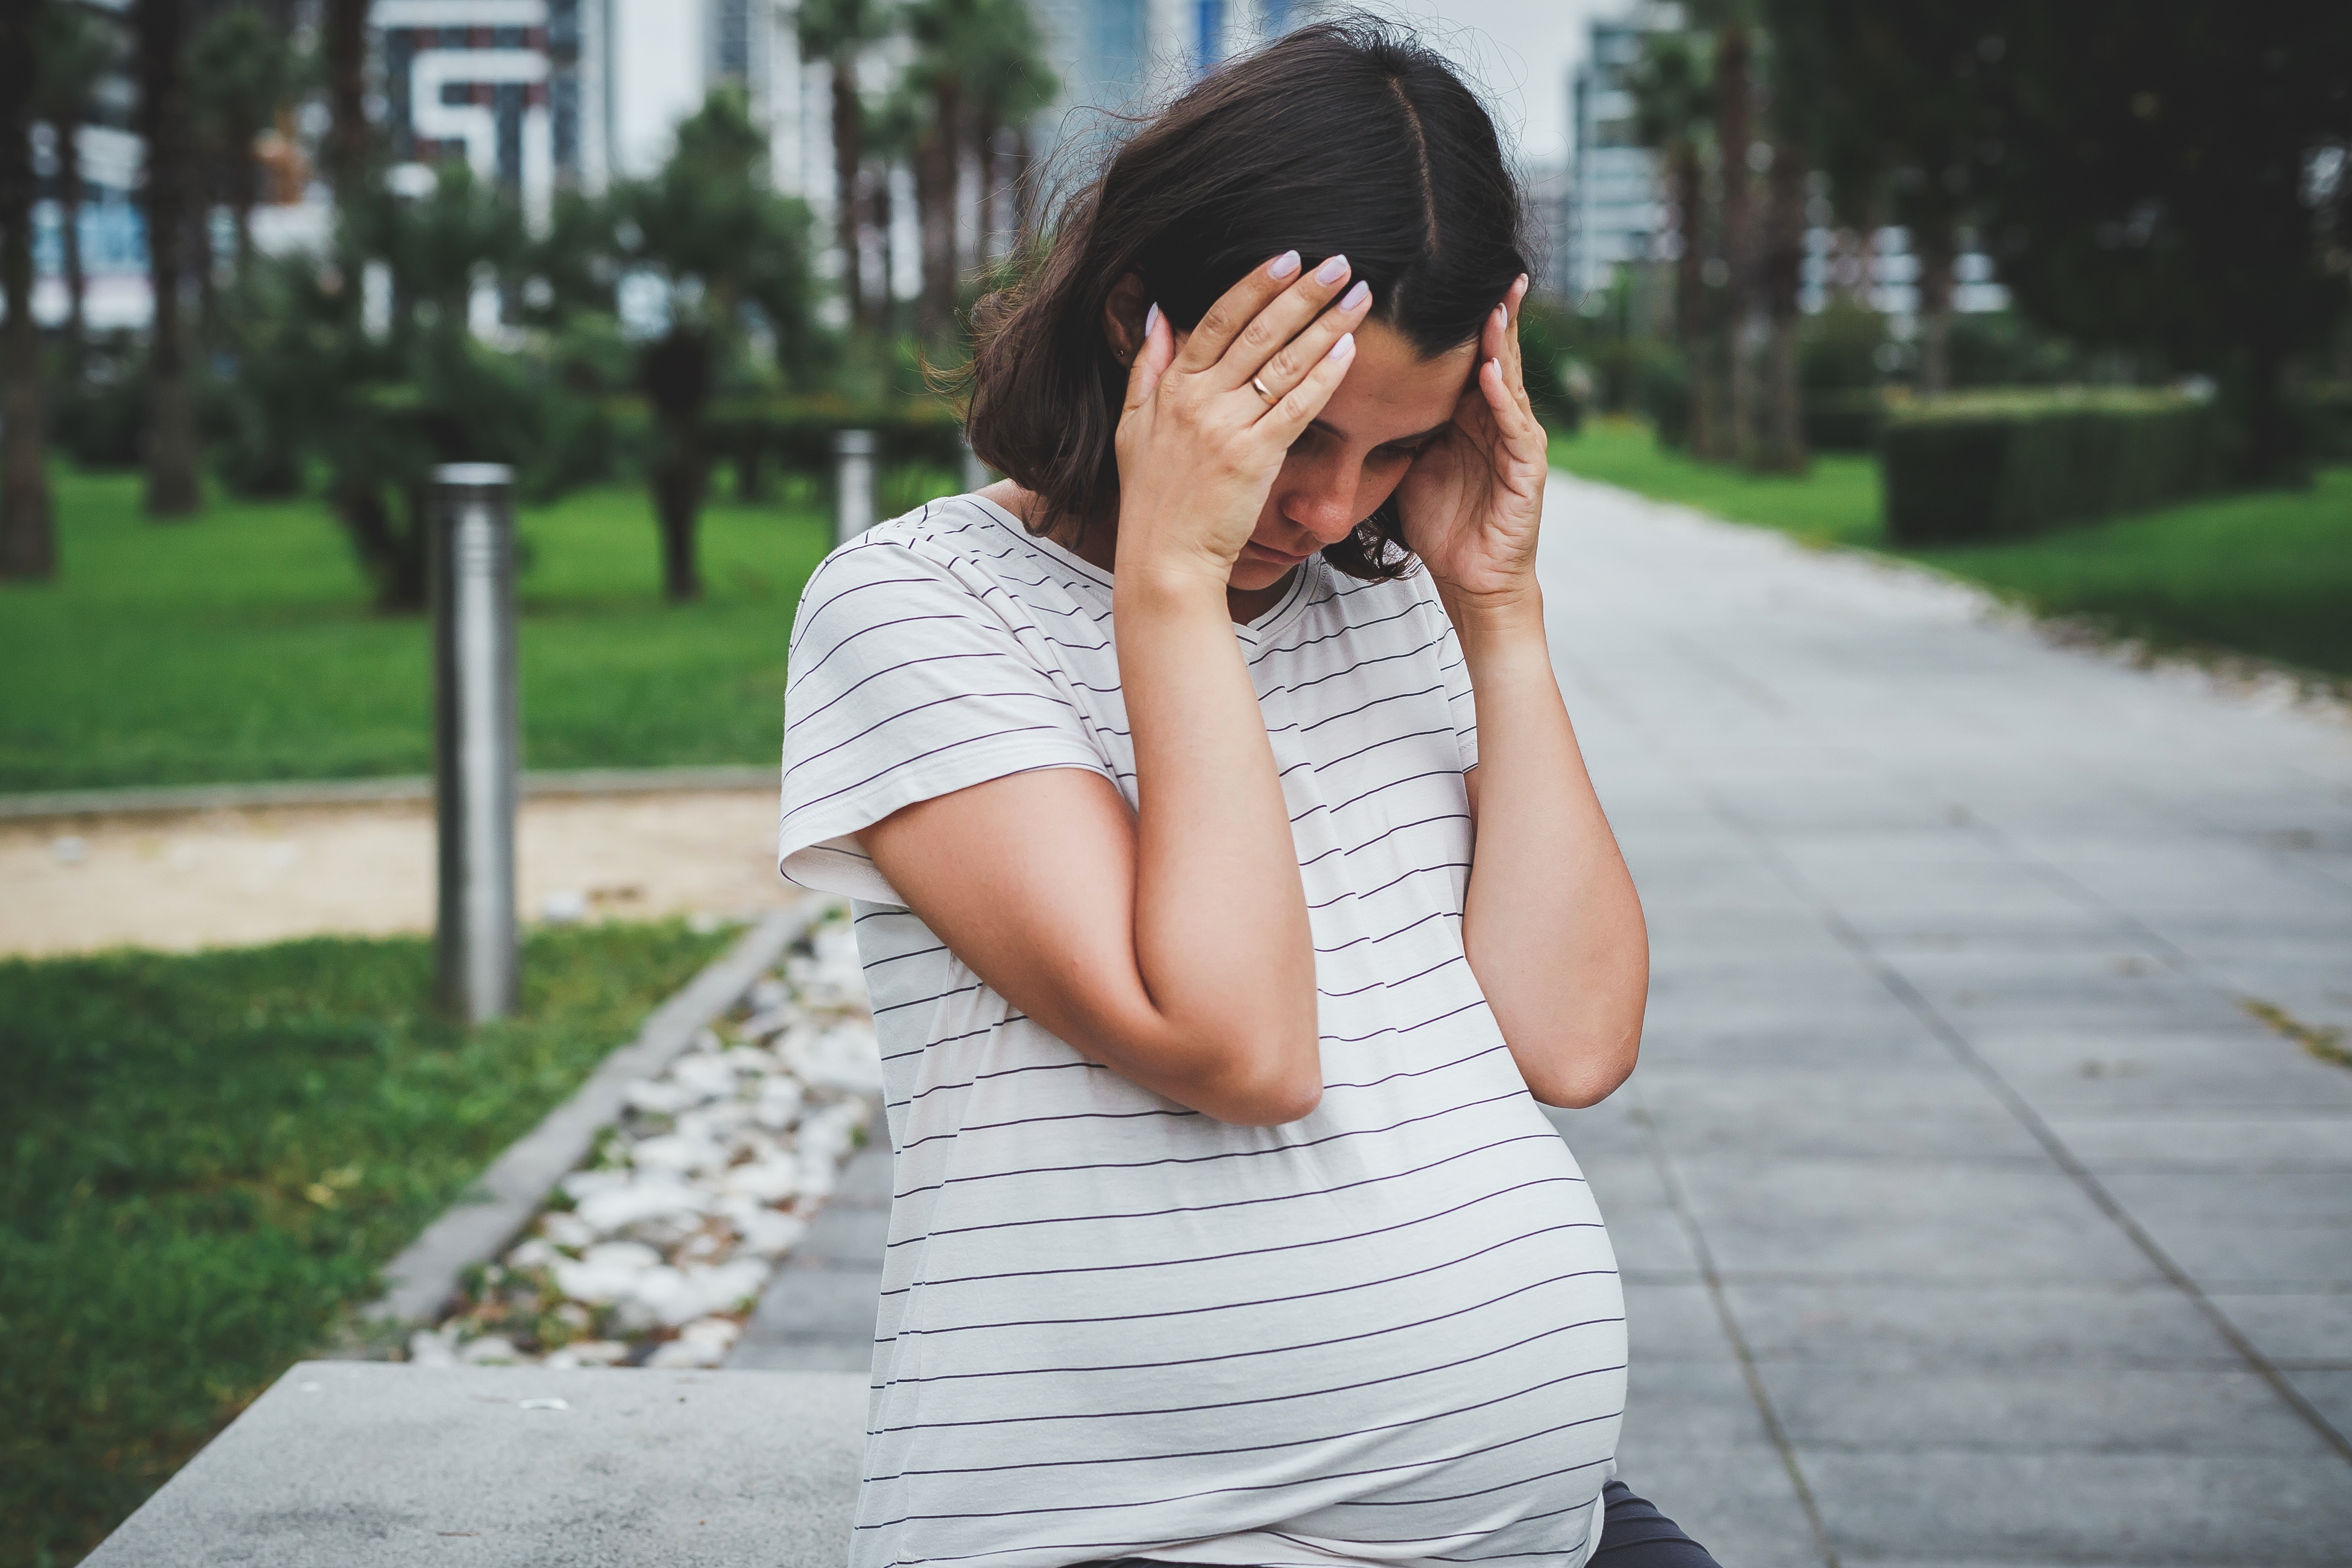 A frustrated pregnant woman | Source: Shutterstock